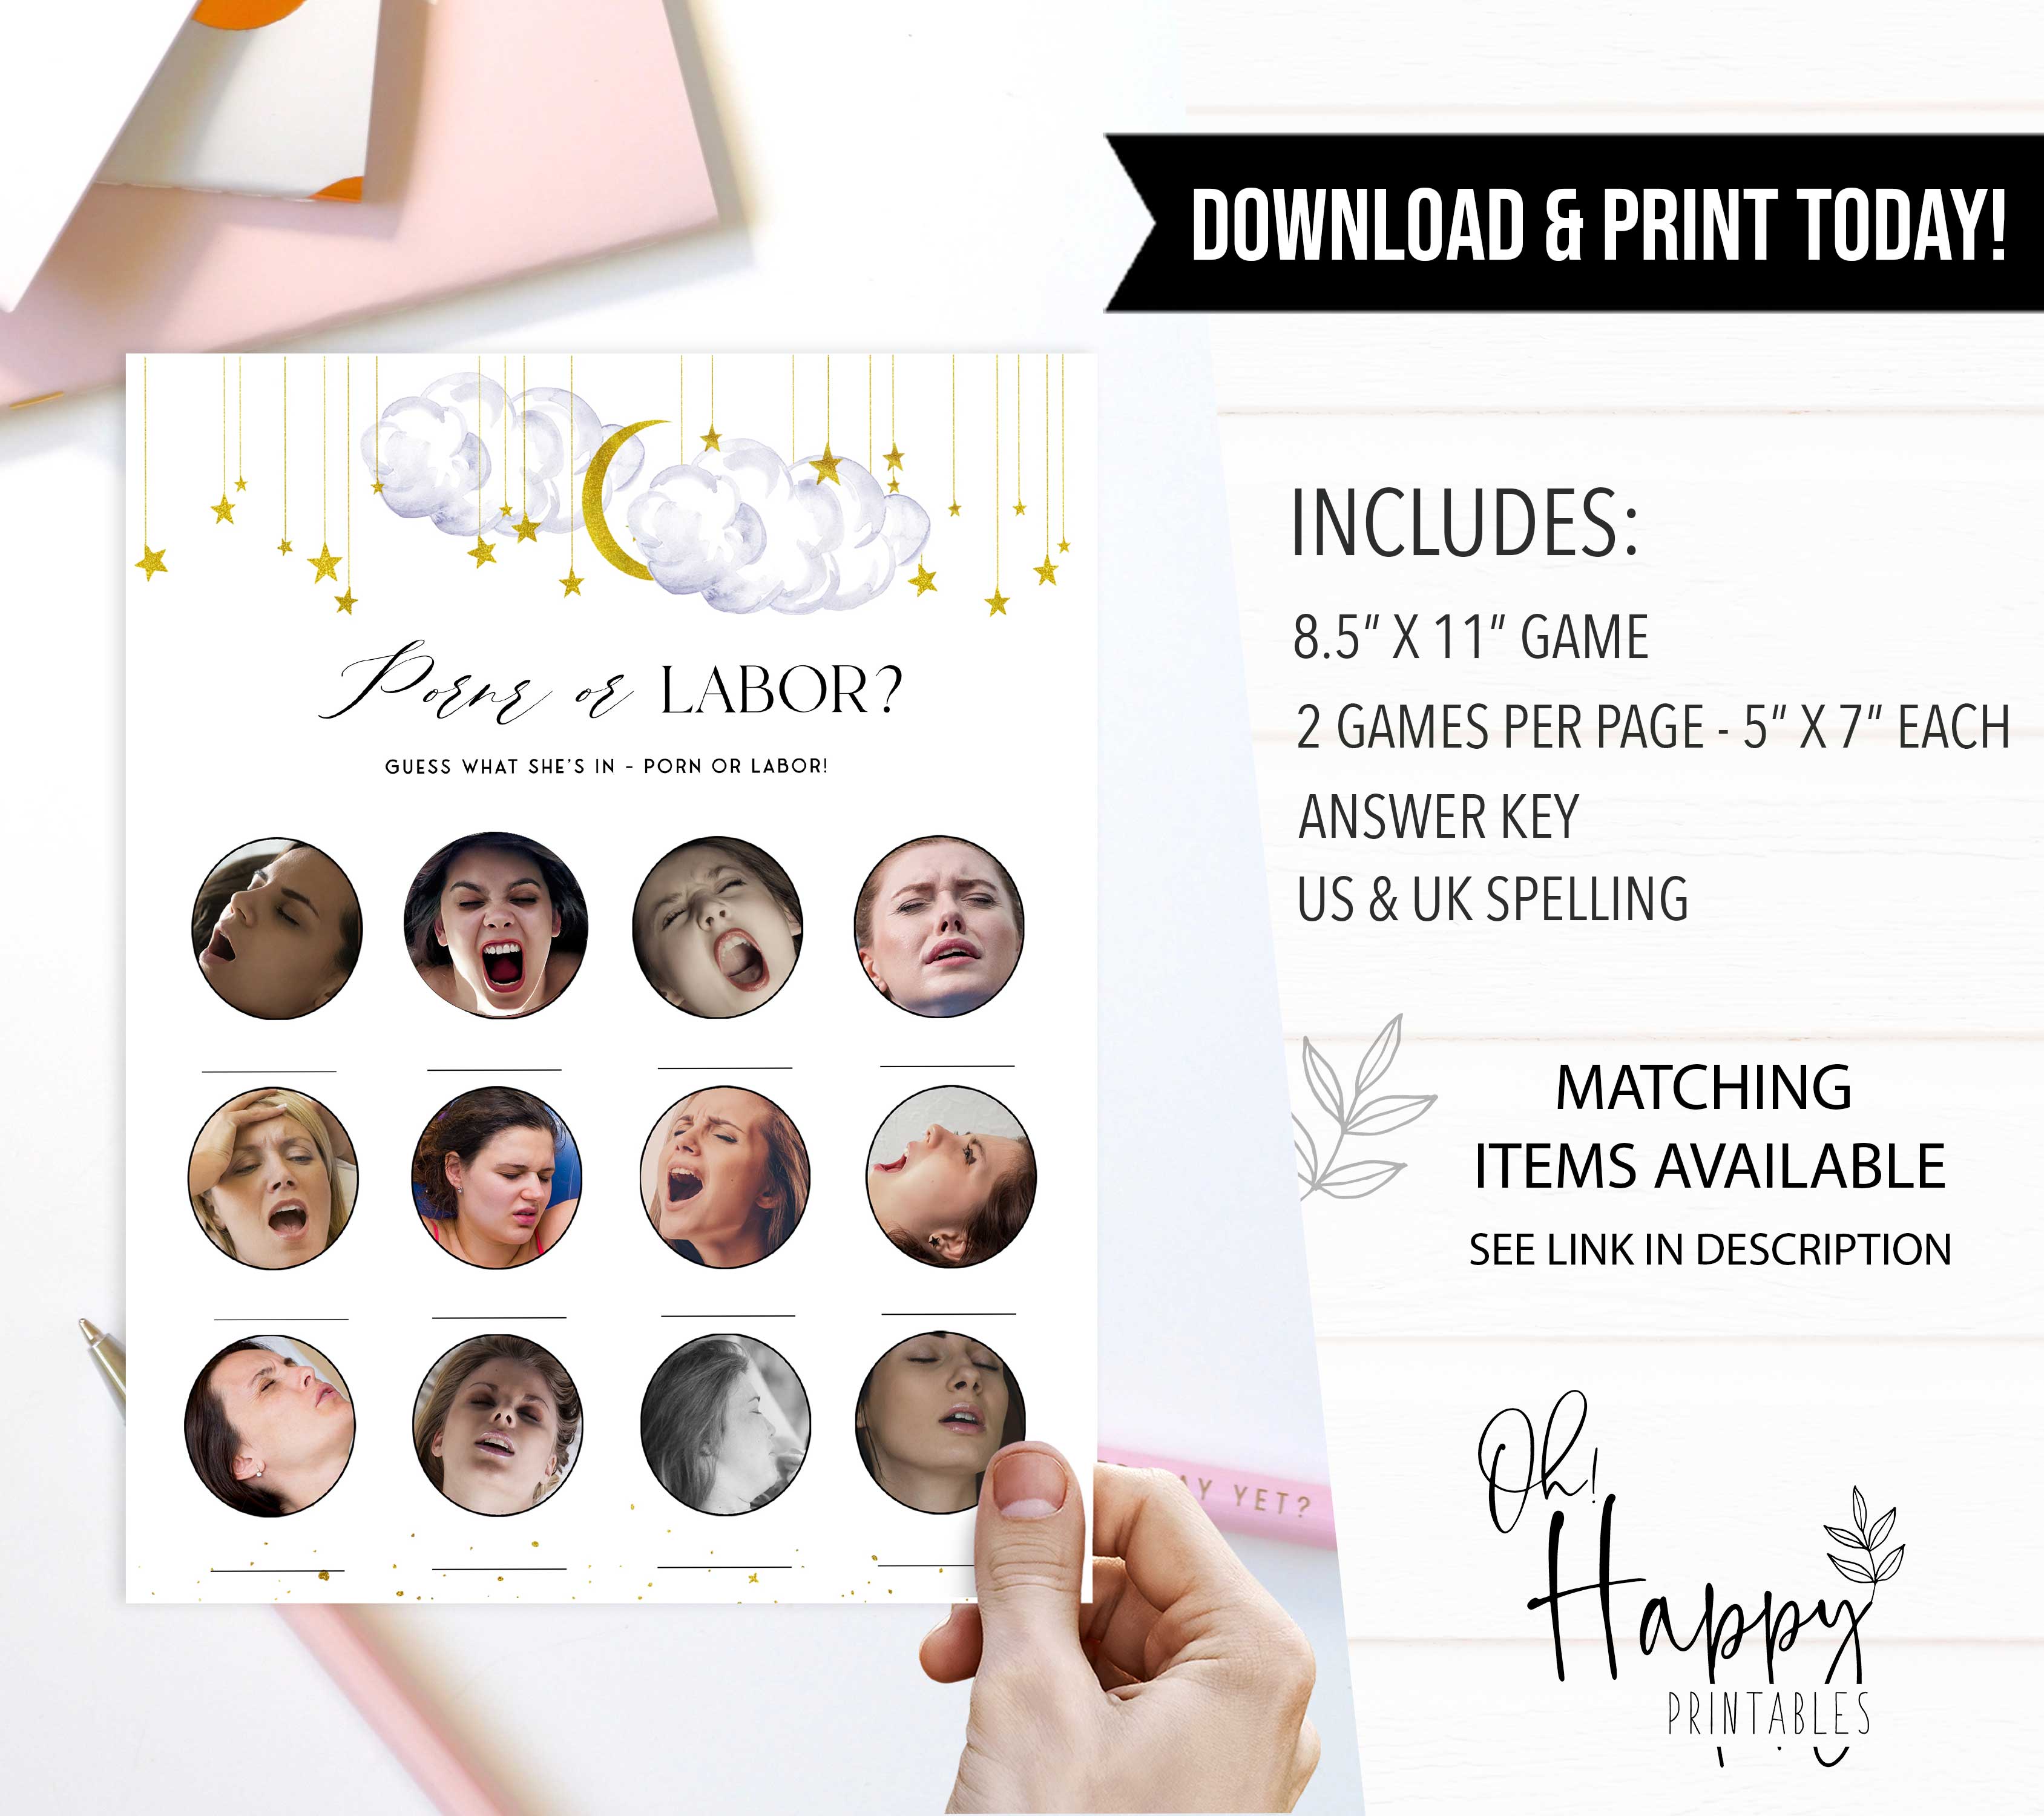 Fully editable and printable baby shower porn or labor game with a little star design. Perfect for a Twinkle Little Star baby shower themed party